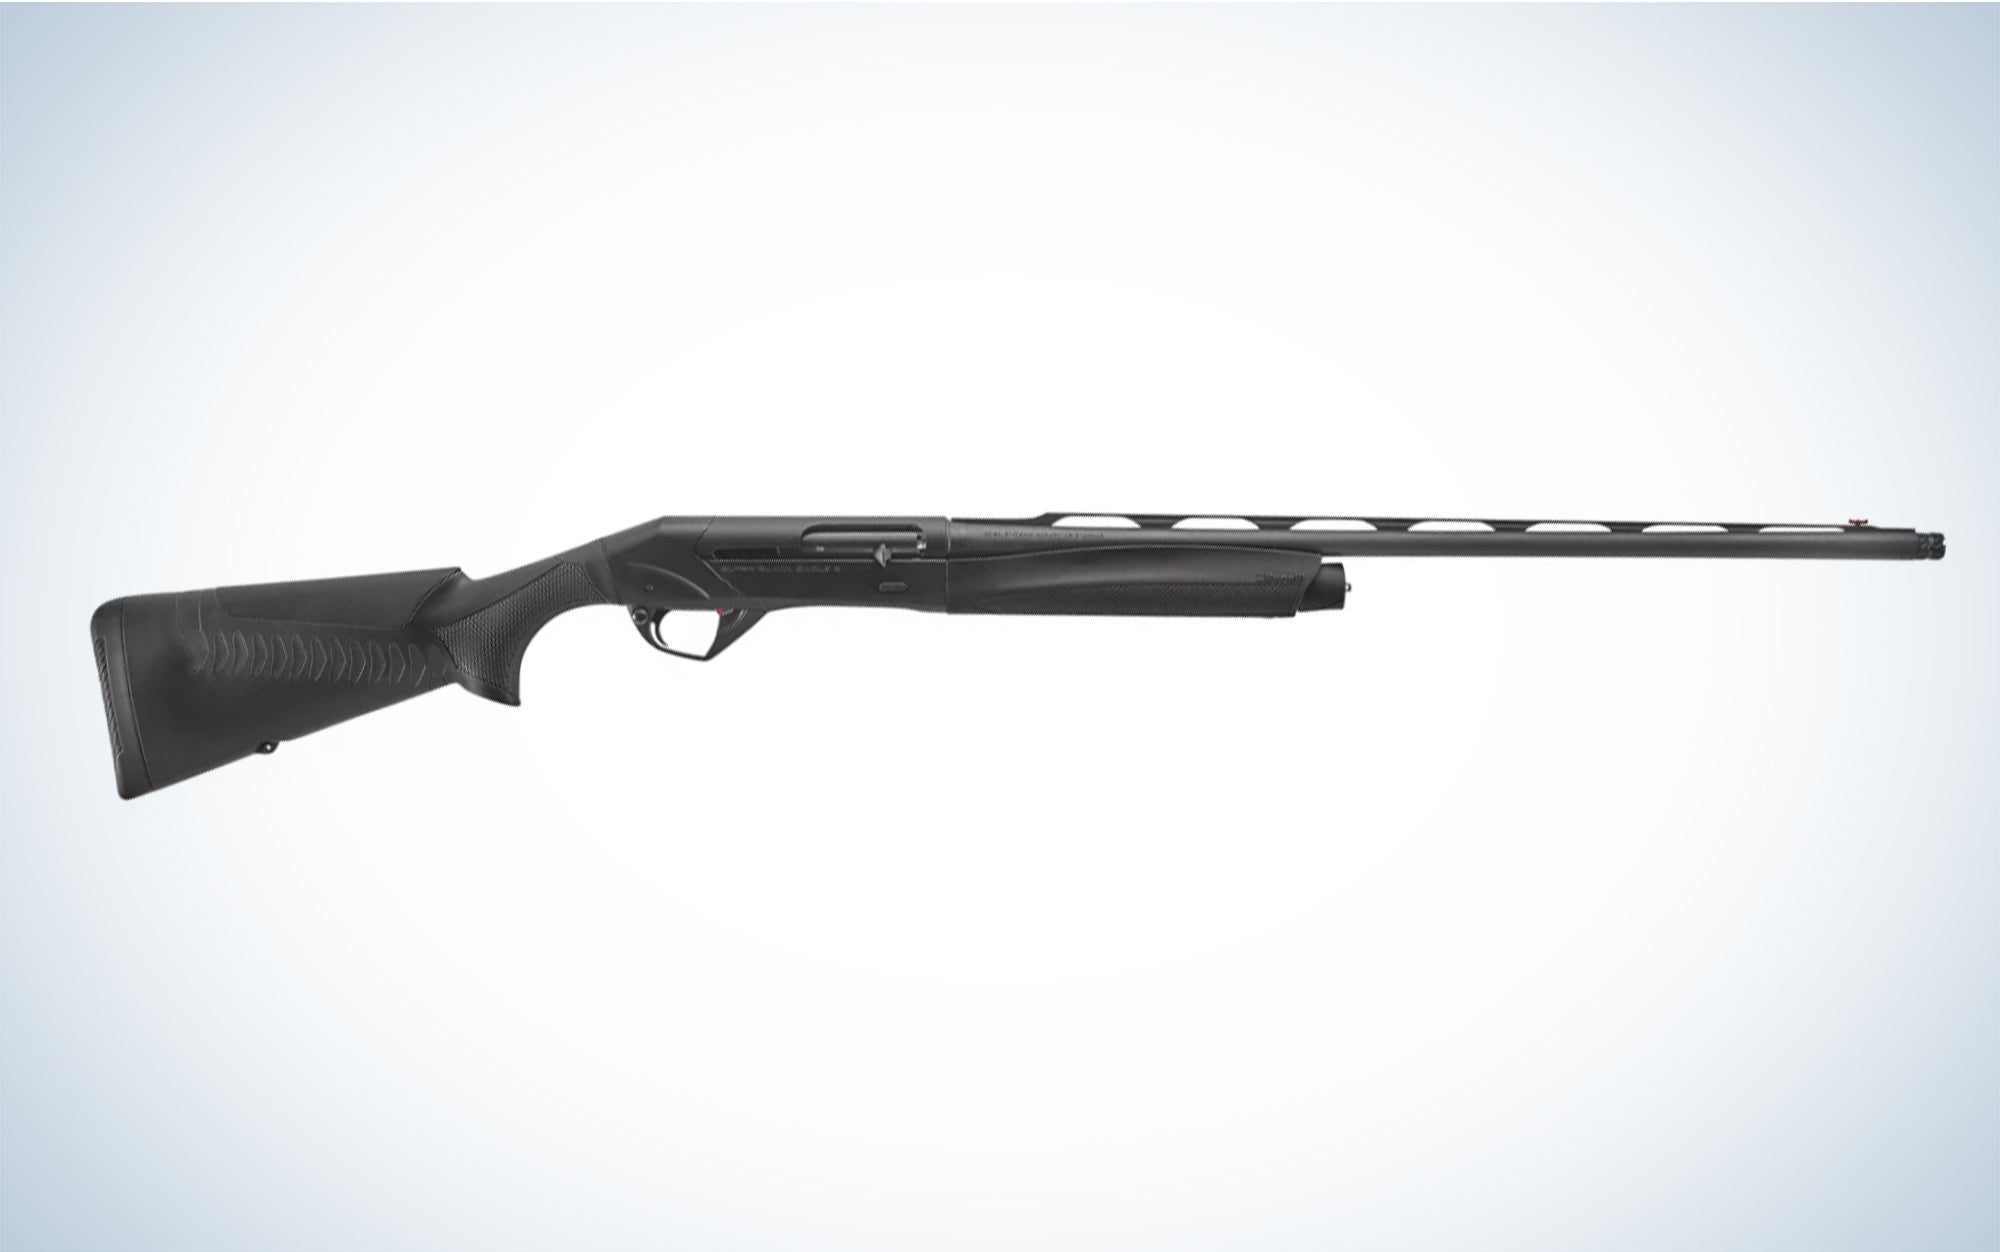 We tested the Benelli SBE 3 28-gauge.